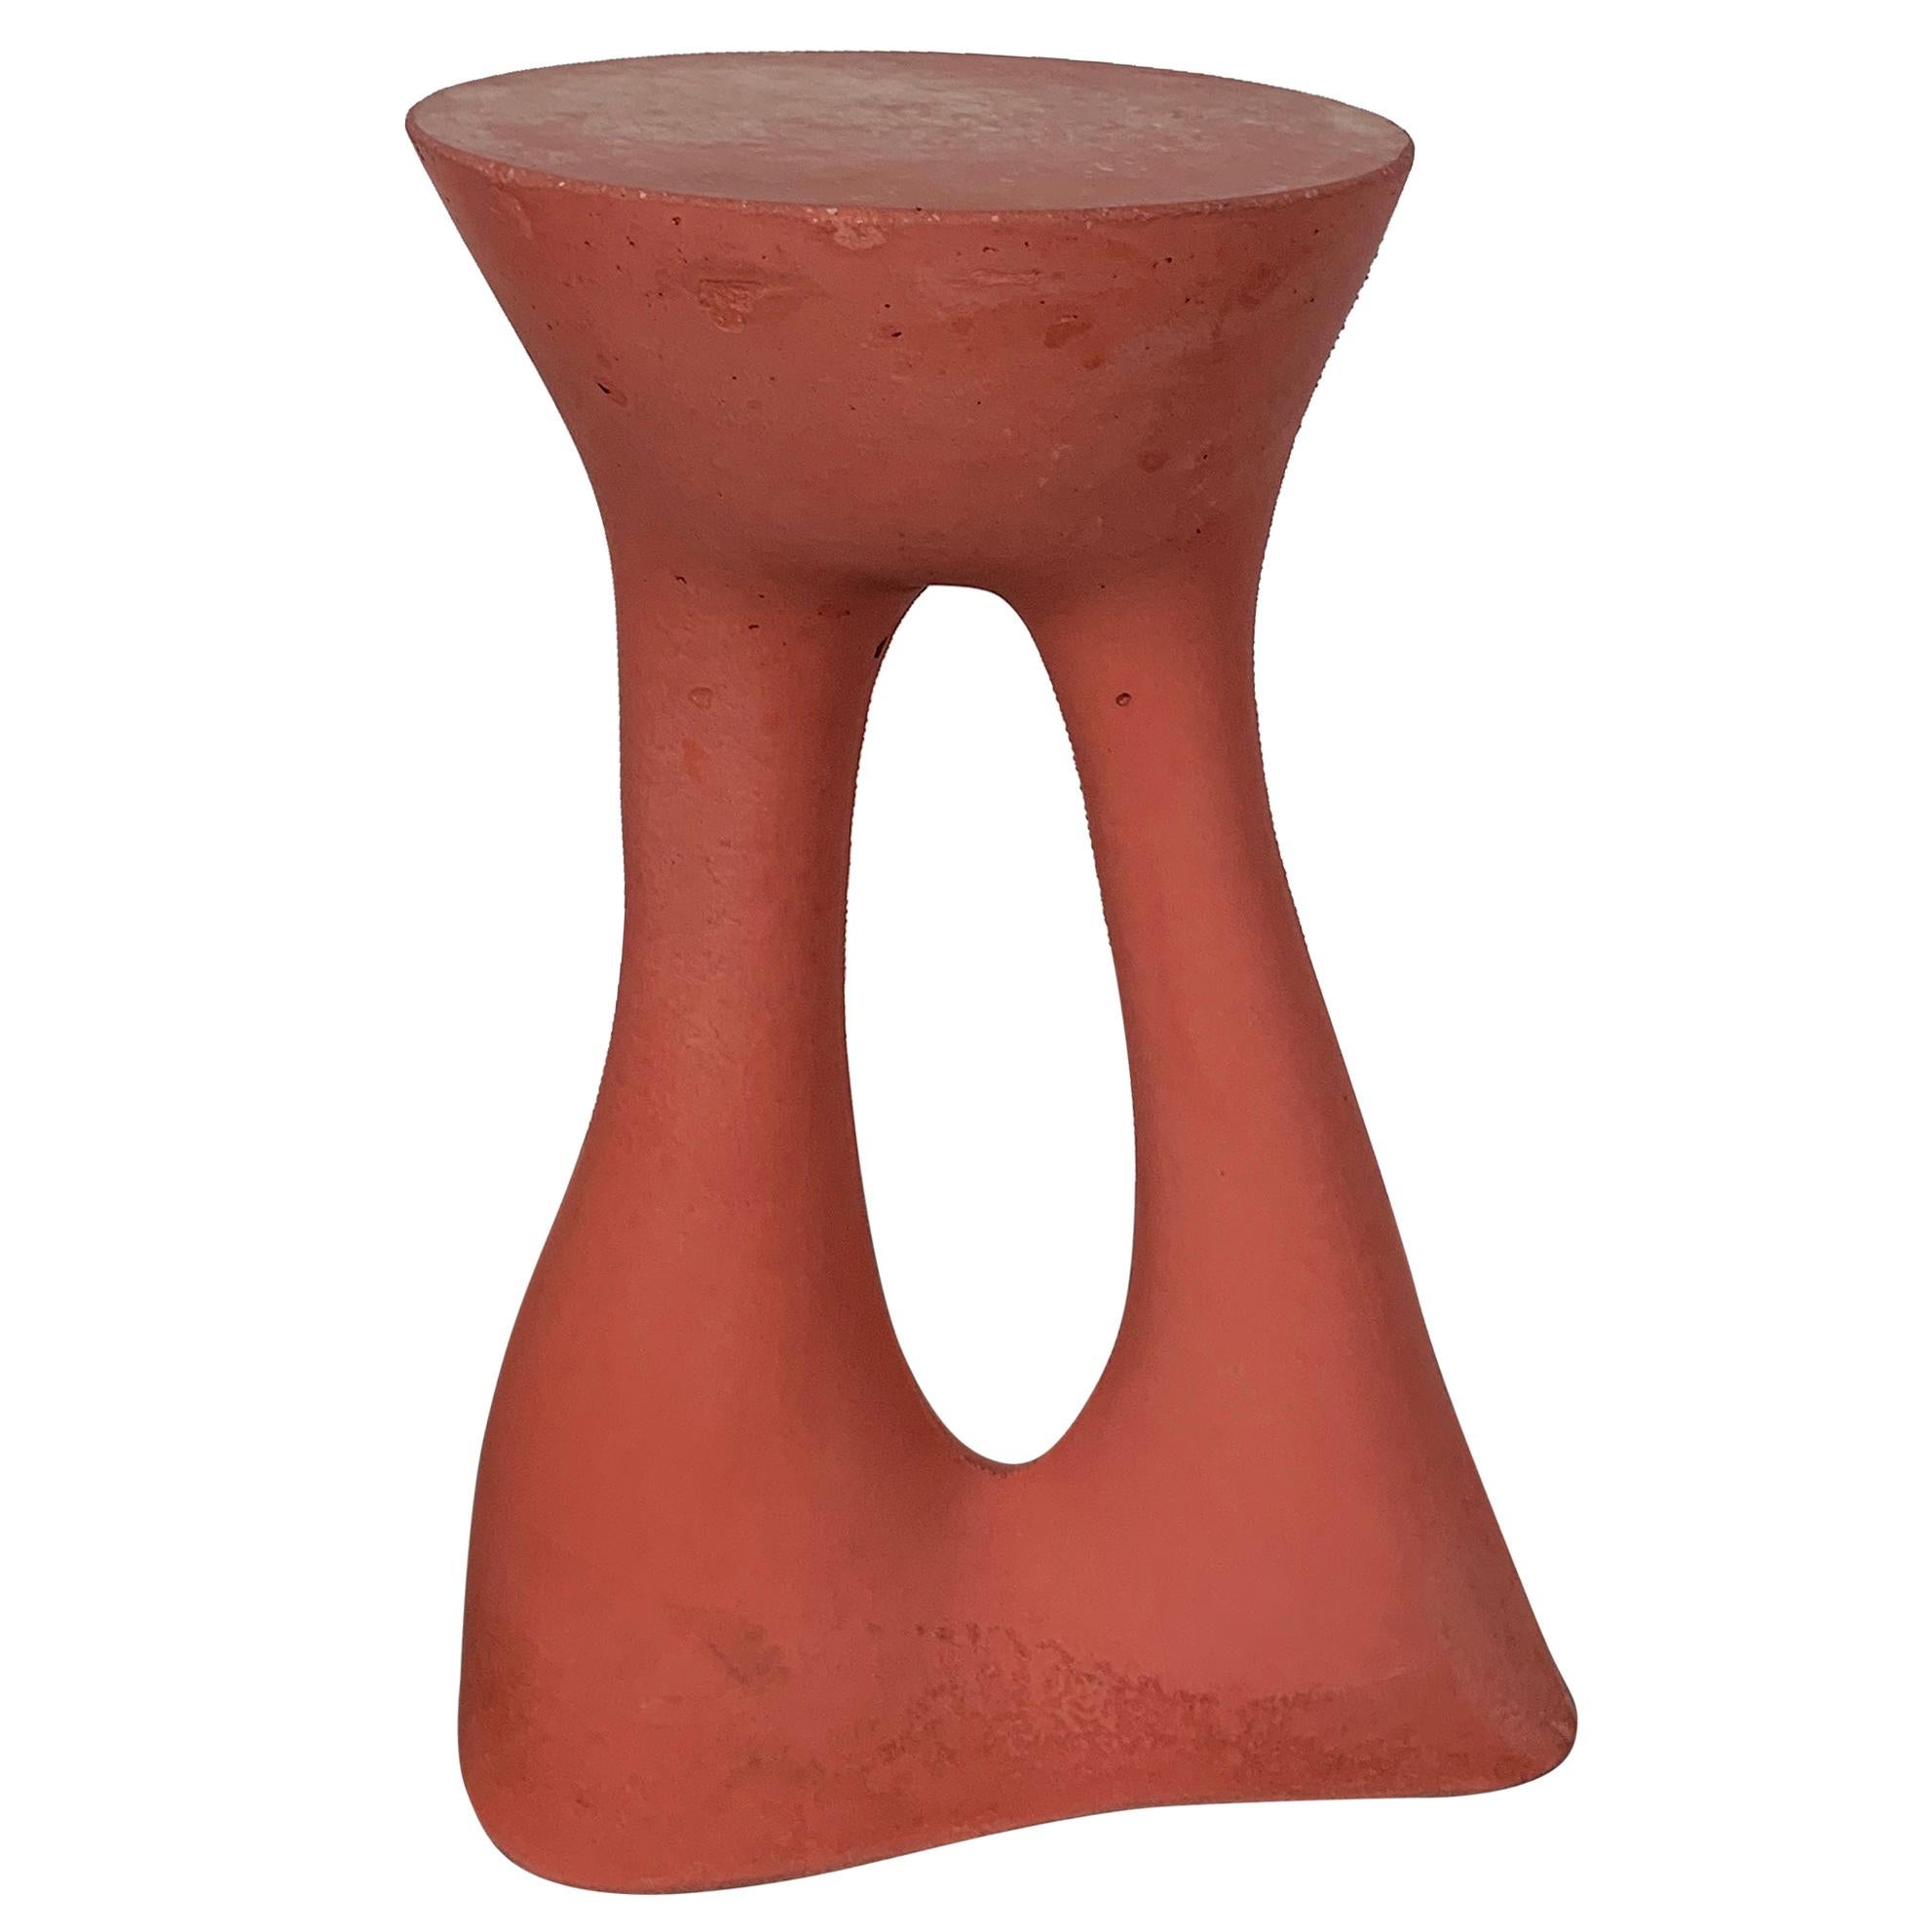 Tall Concrete Kreten Side Tables in Red from Souda, Factory 2nd